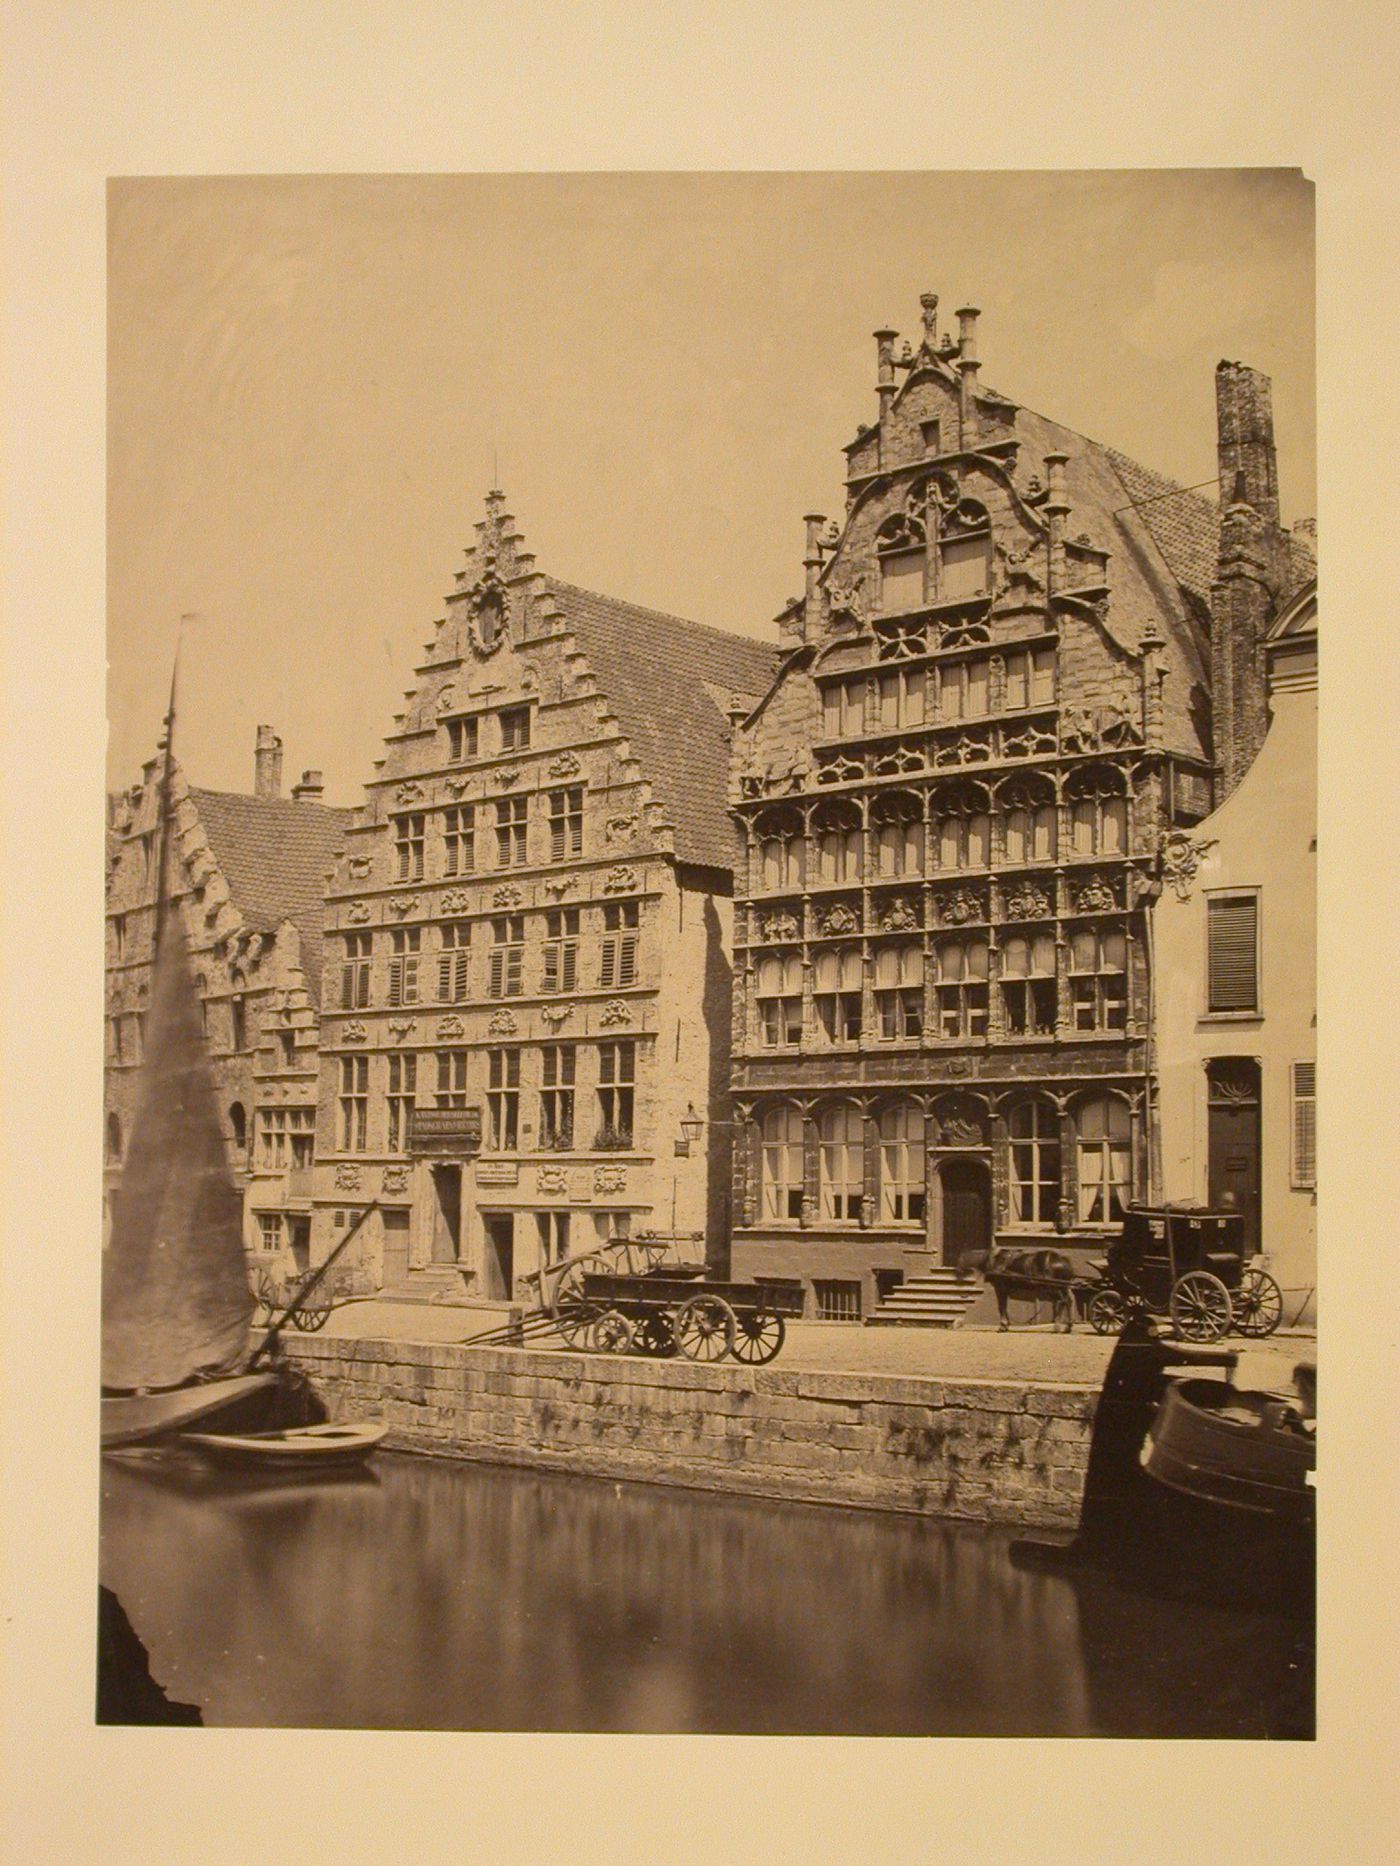 View of Guild House of the Free Boatmen with boats in the foreground, Graslei, Ghent, Belgium